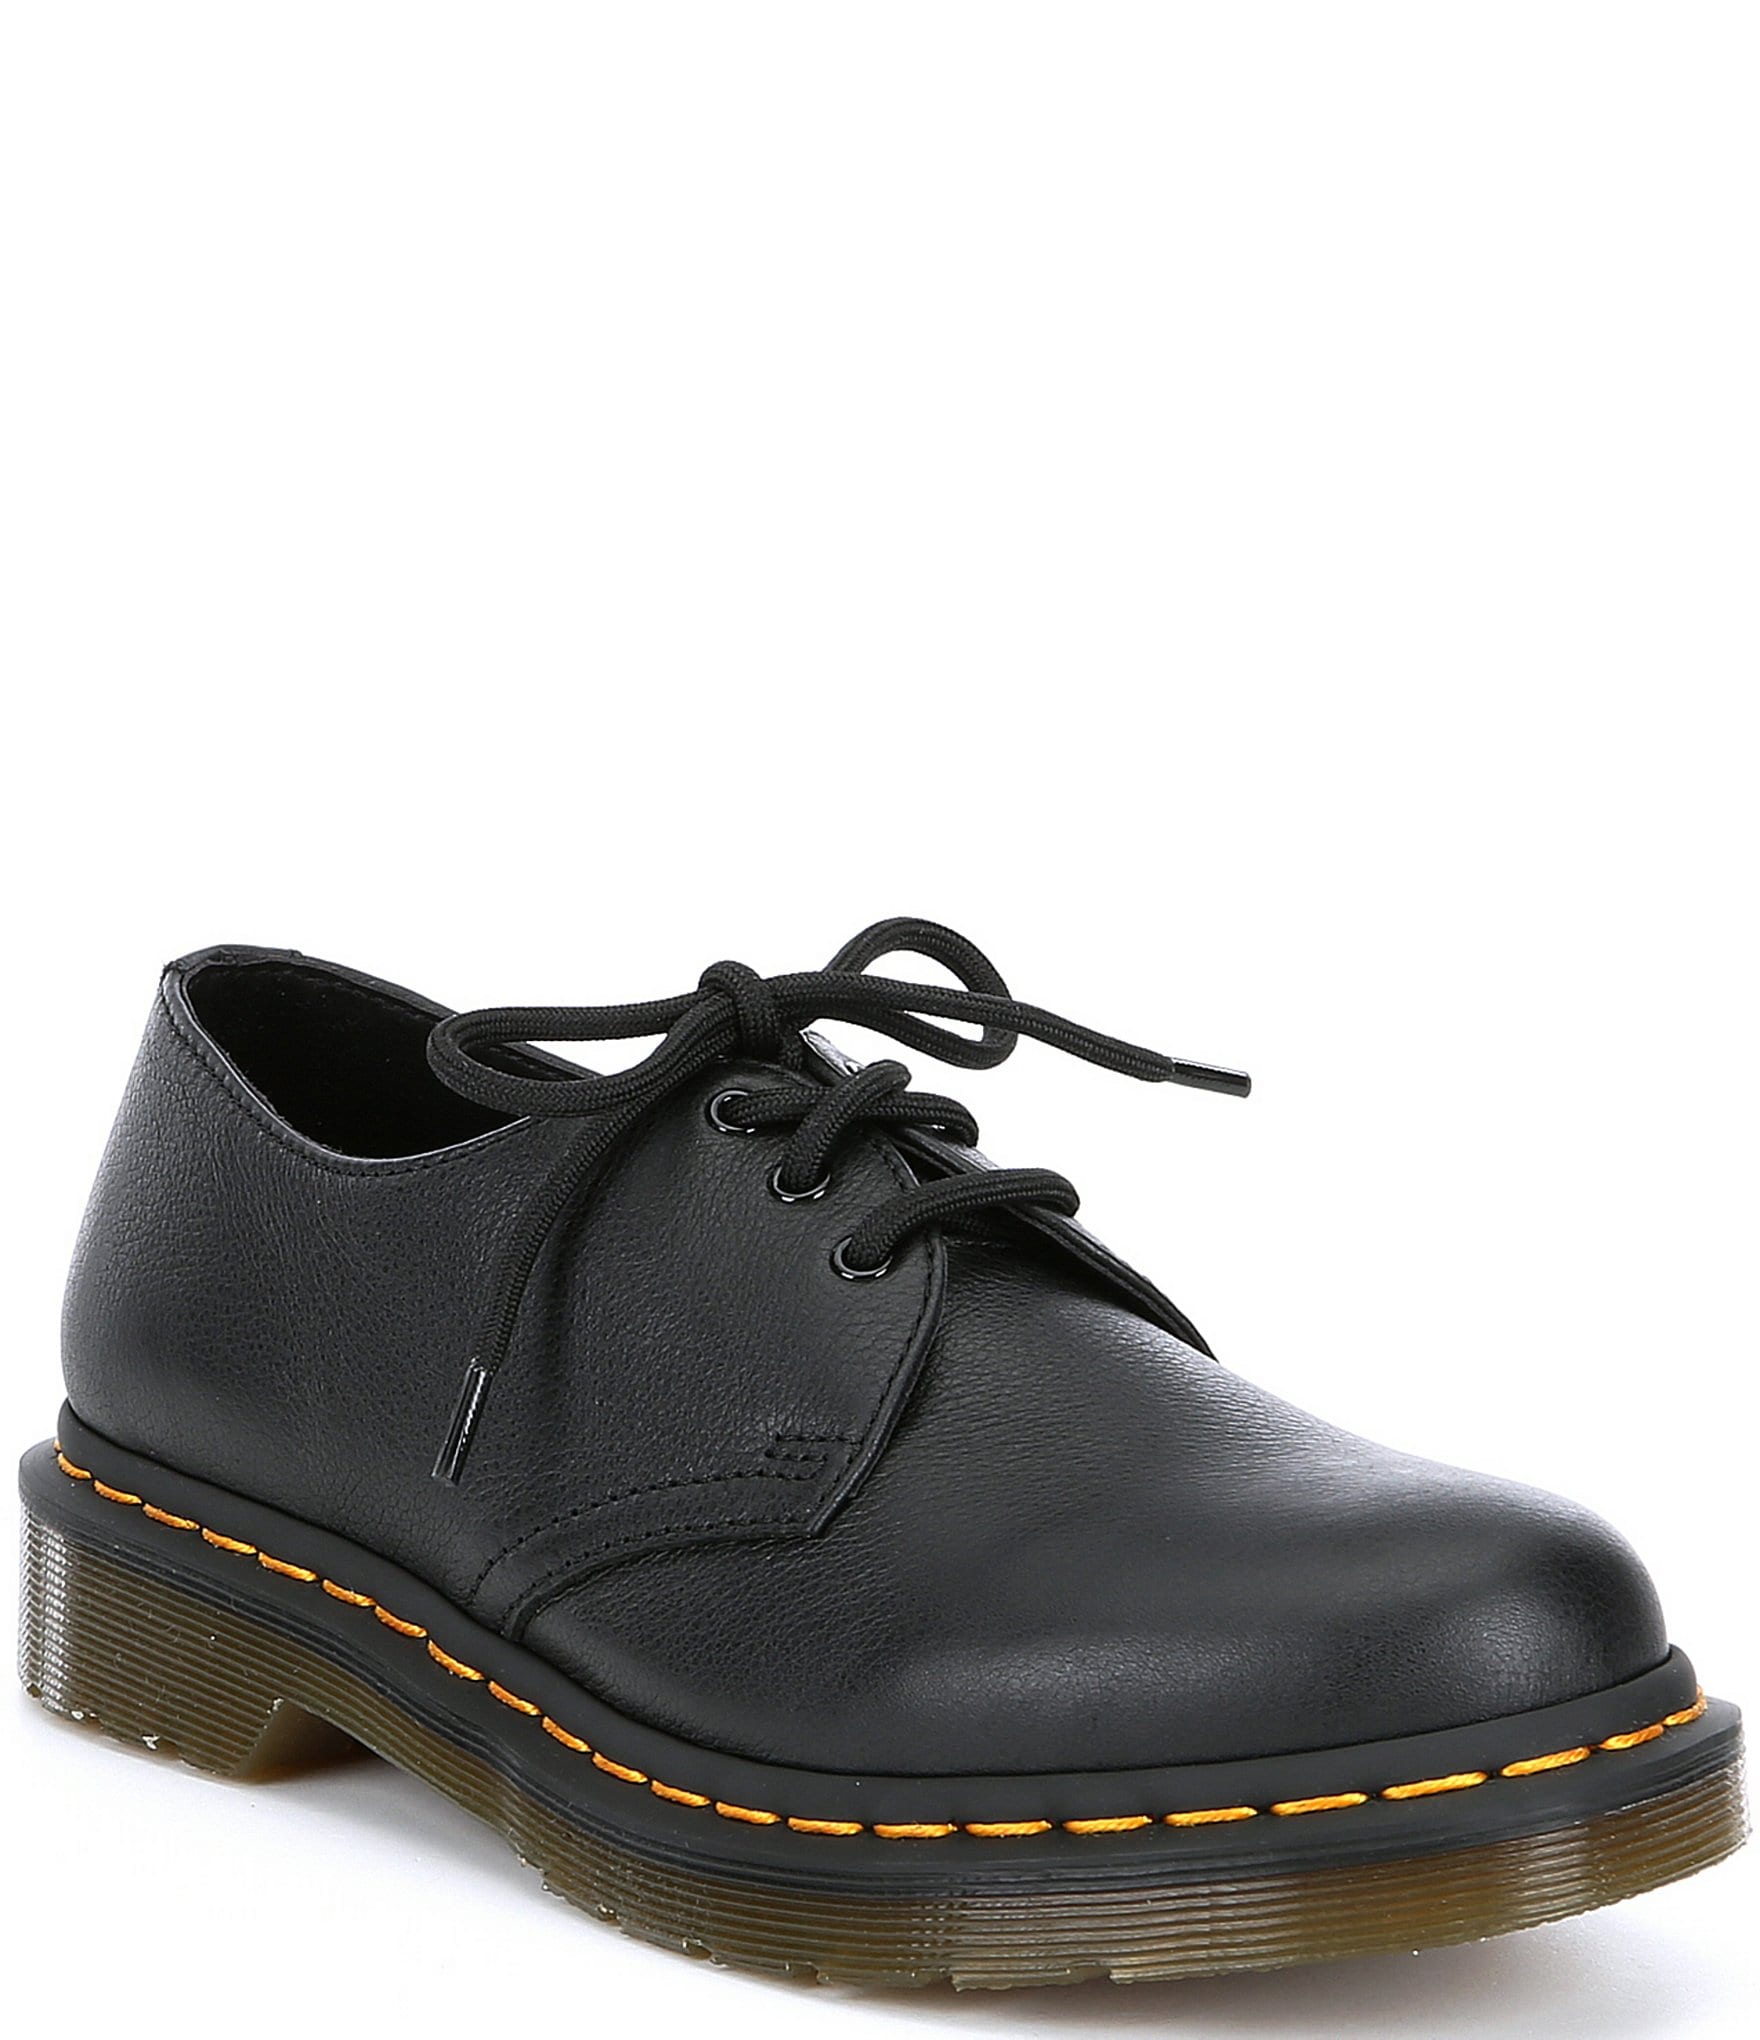 Dr. Martens Women's 1461 Leather Oxford 